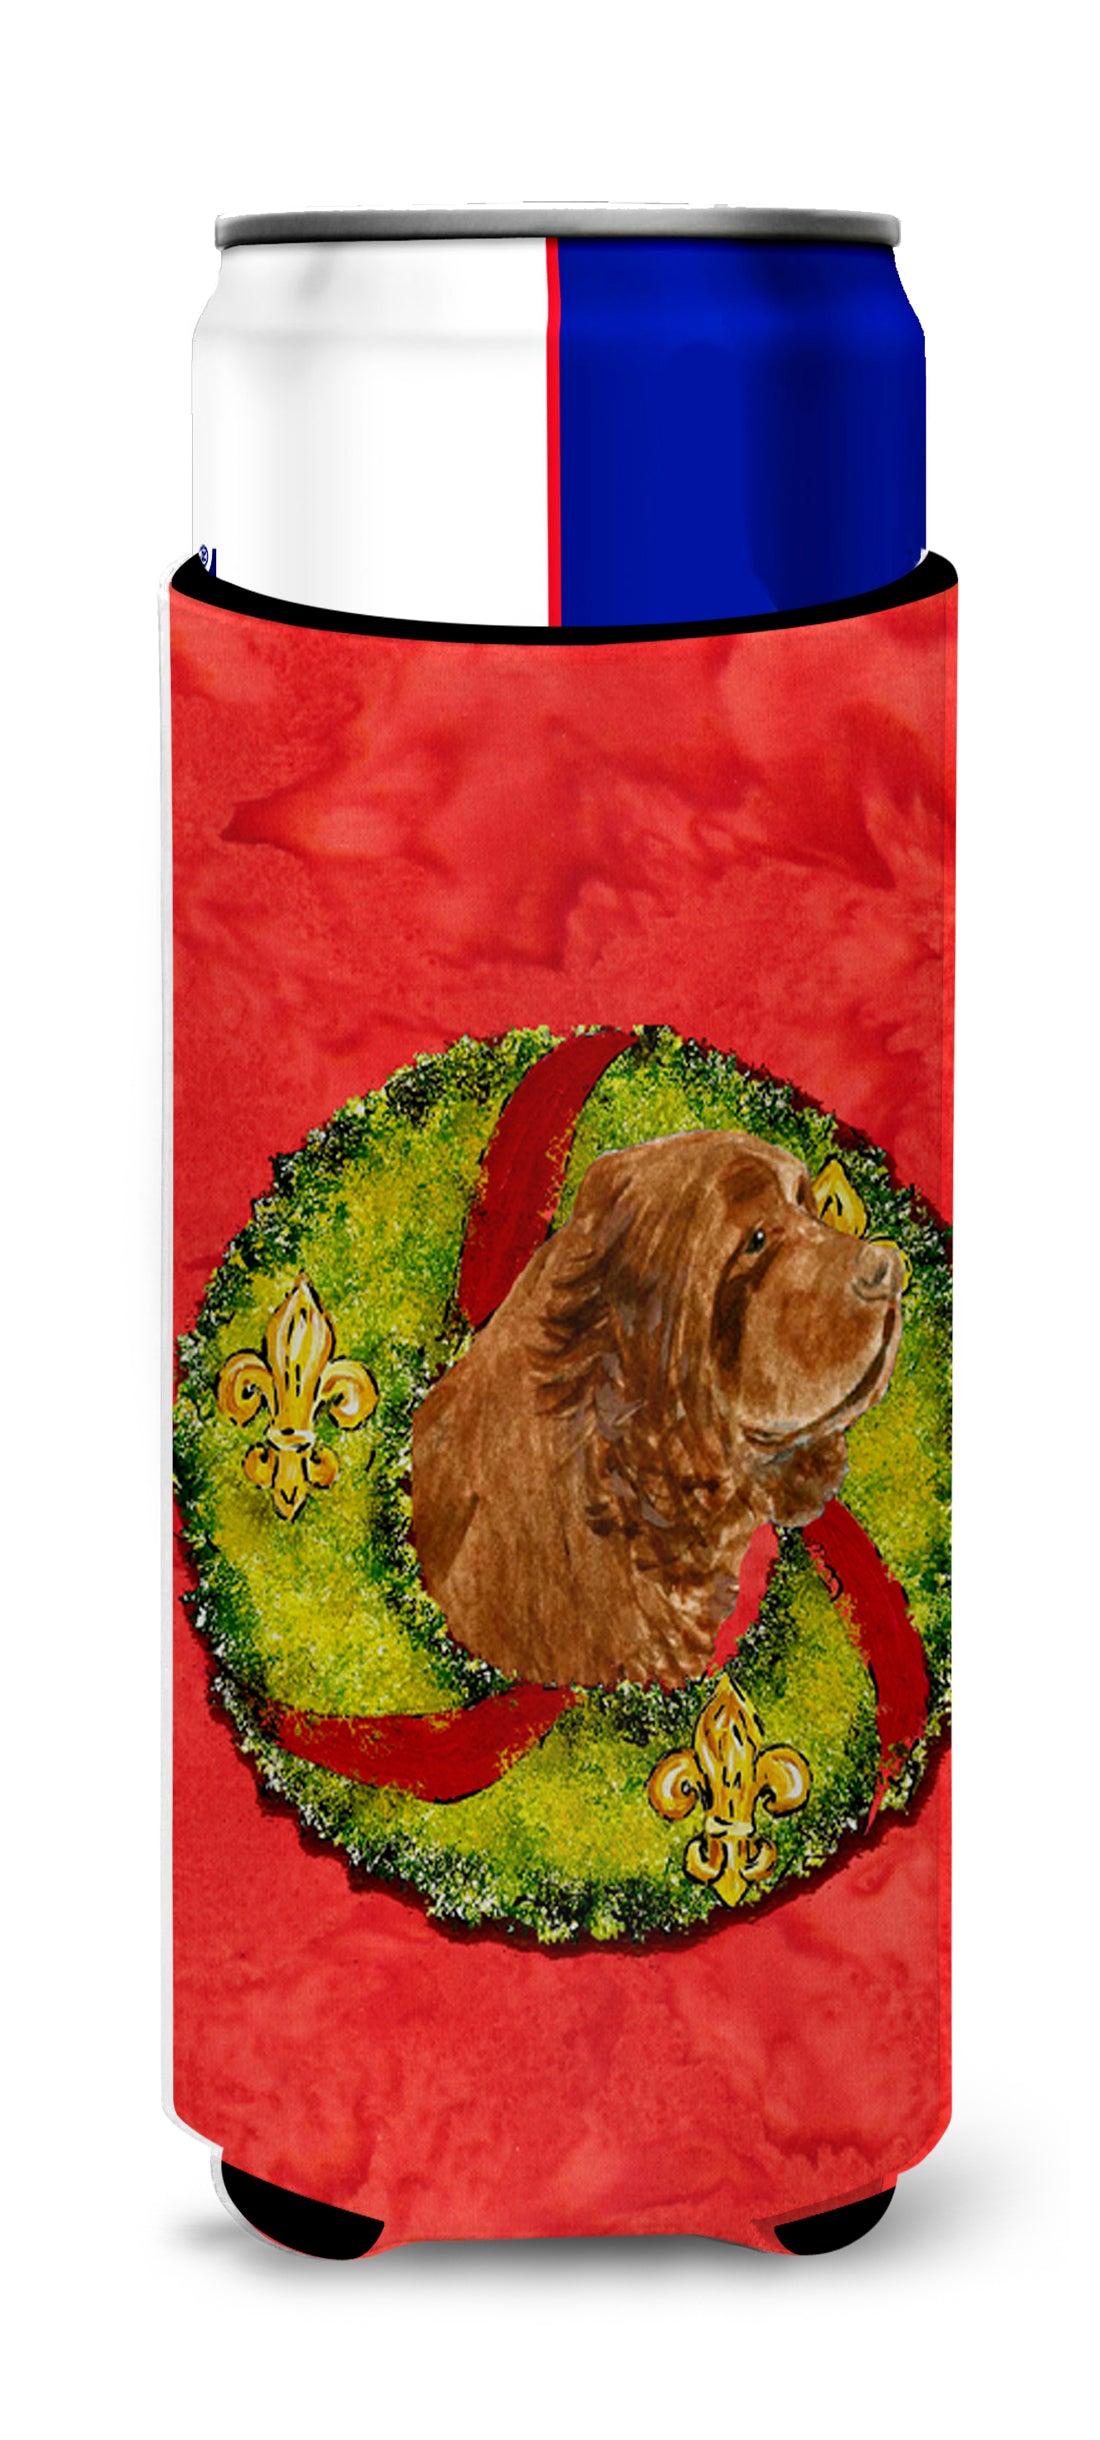 Sussex Spaniel Cristmas Wreath Ultra Beverage Insulators for slim cans SS4197MUK.